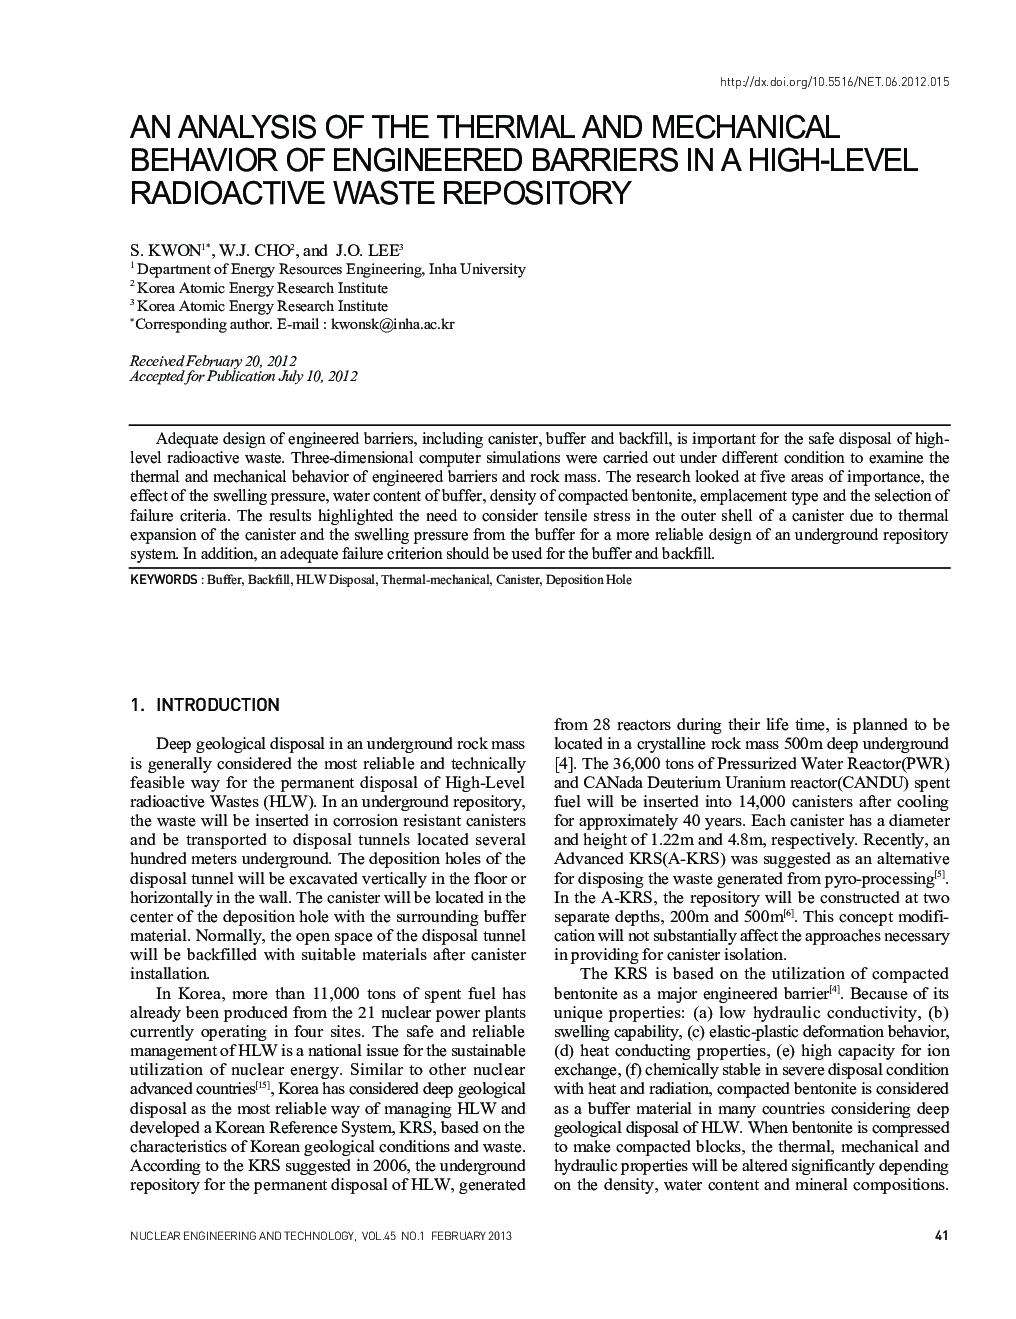 AN ANALYSIS OF THE THERMAL AND MECHANICAL BEHAVIOR OF ENGINEERED BARRIERS IN A HIGH-LEVEL RADIOACTIVE WASTE REPOSITORY